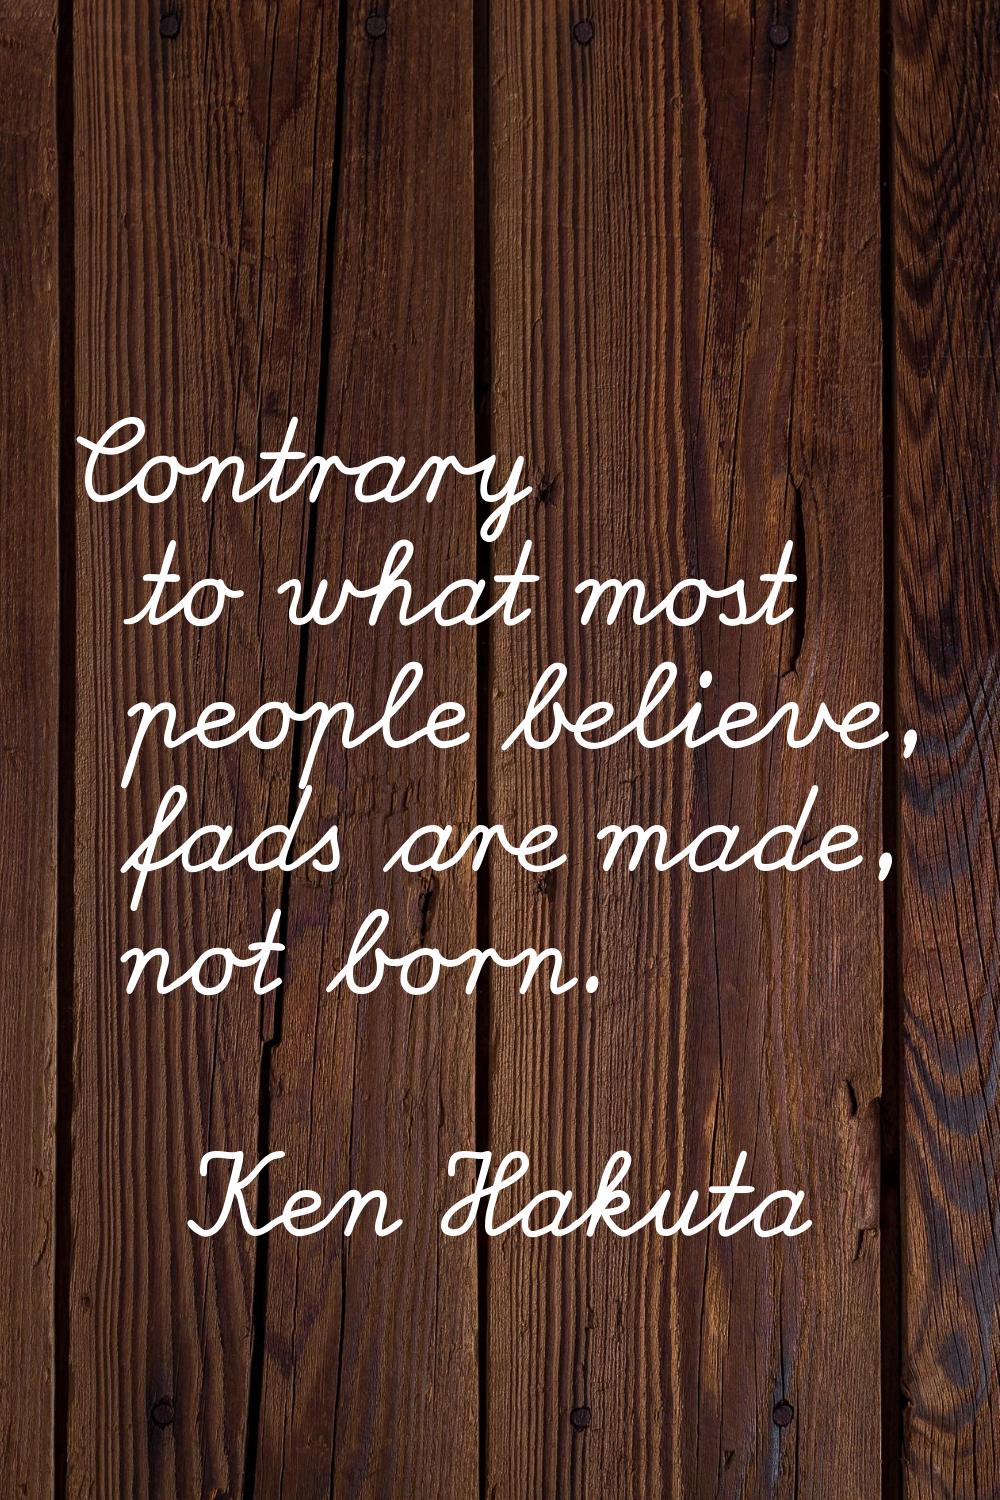 Contrary to what most people believe, fads are made, not born.